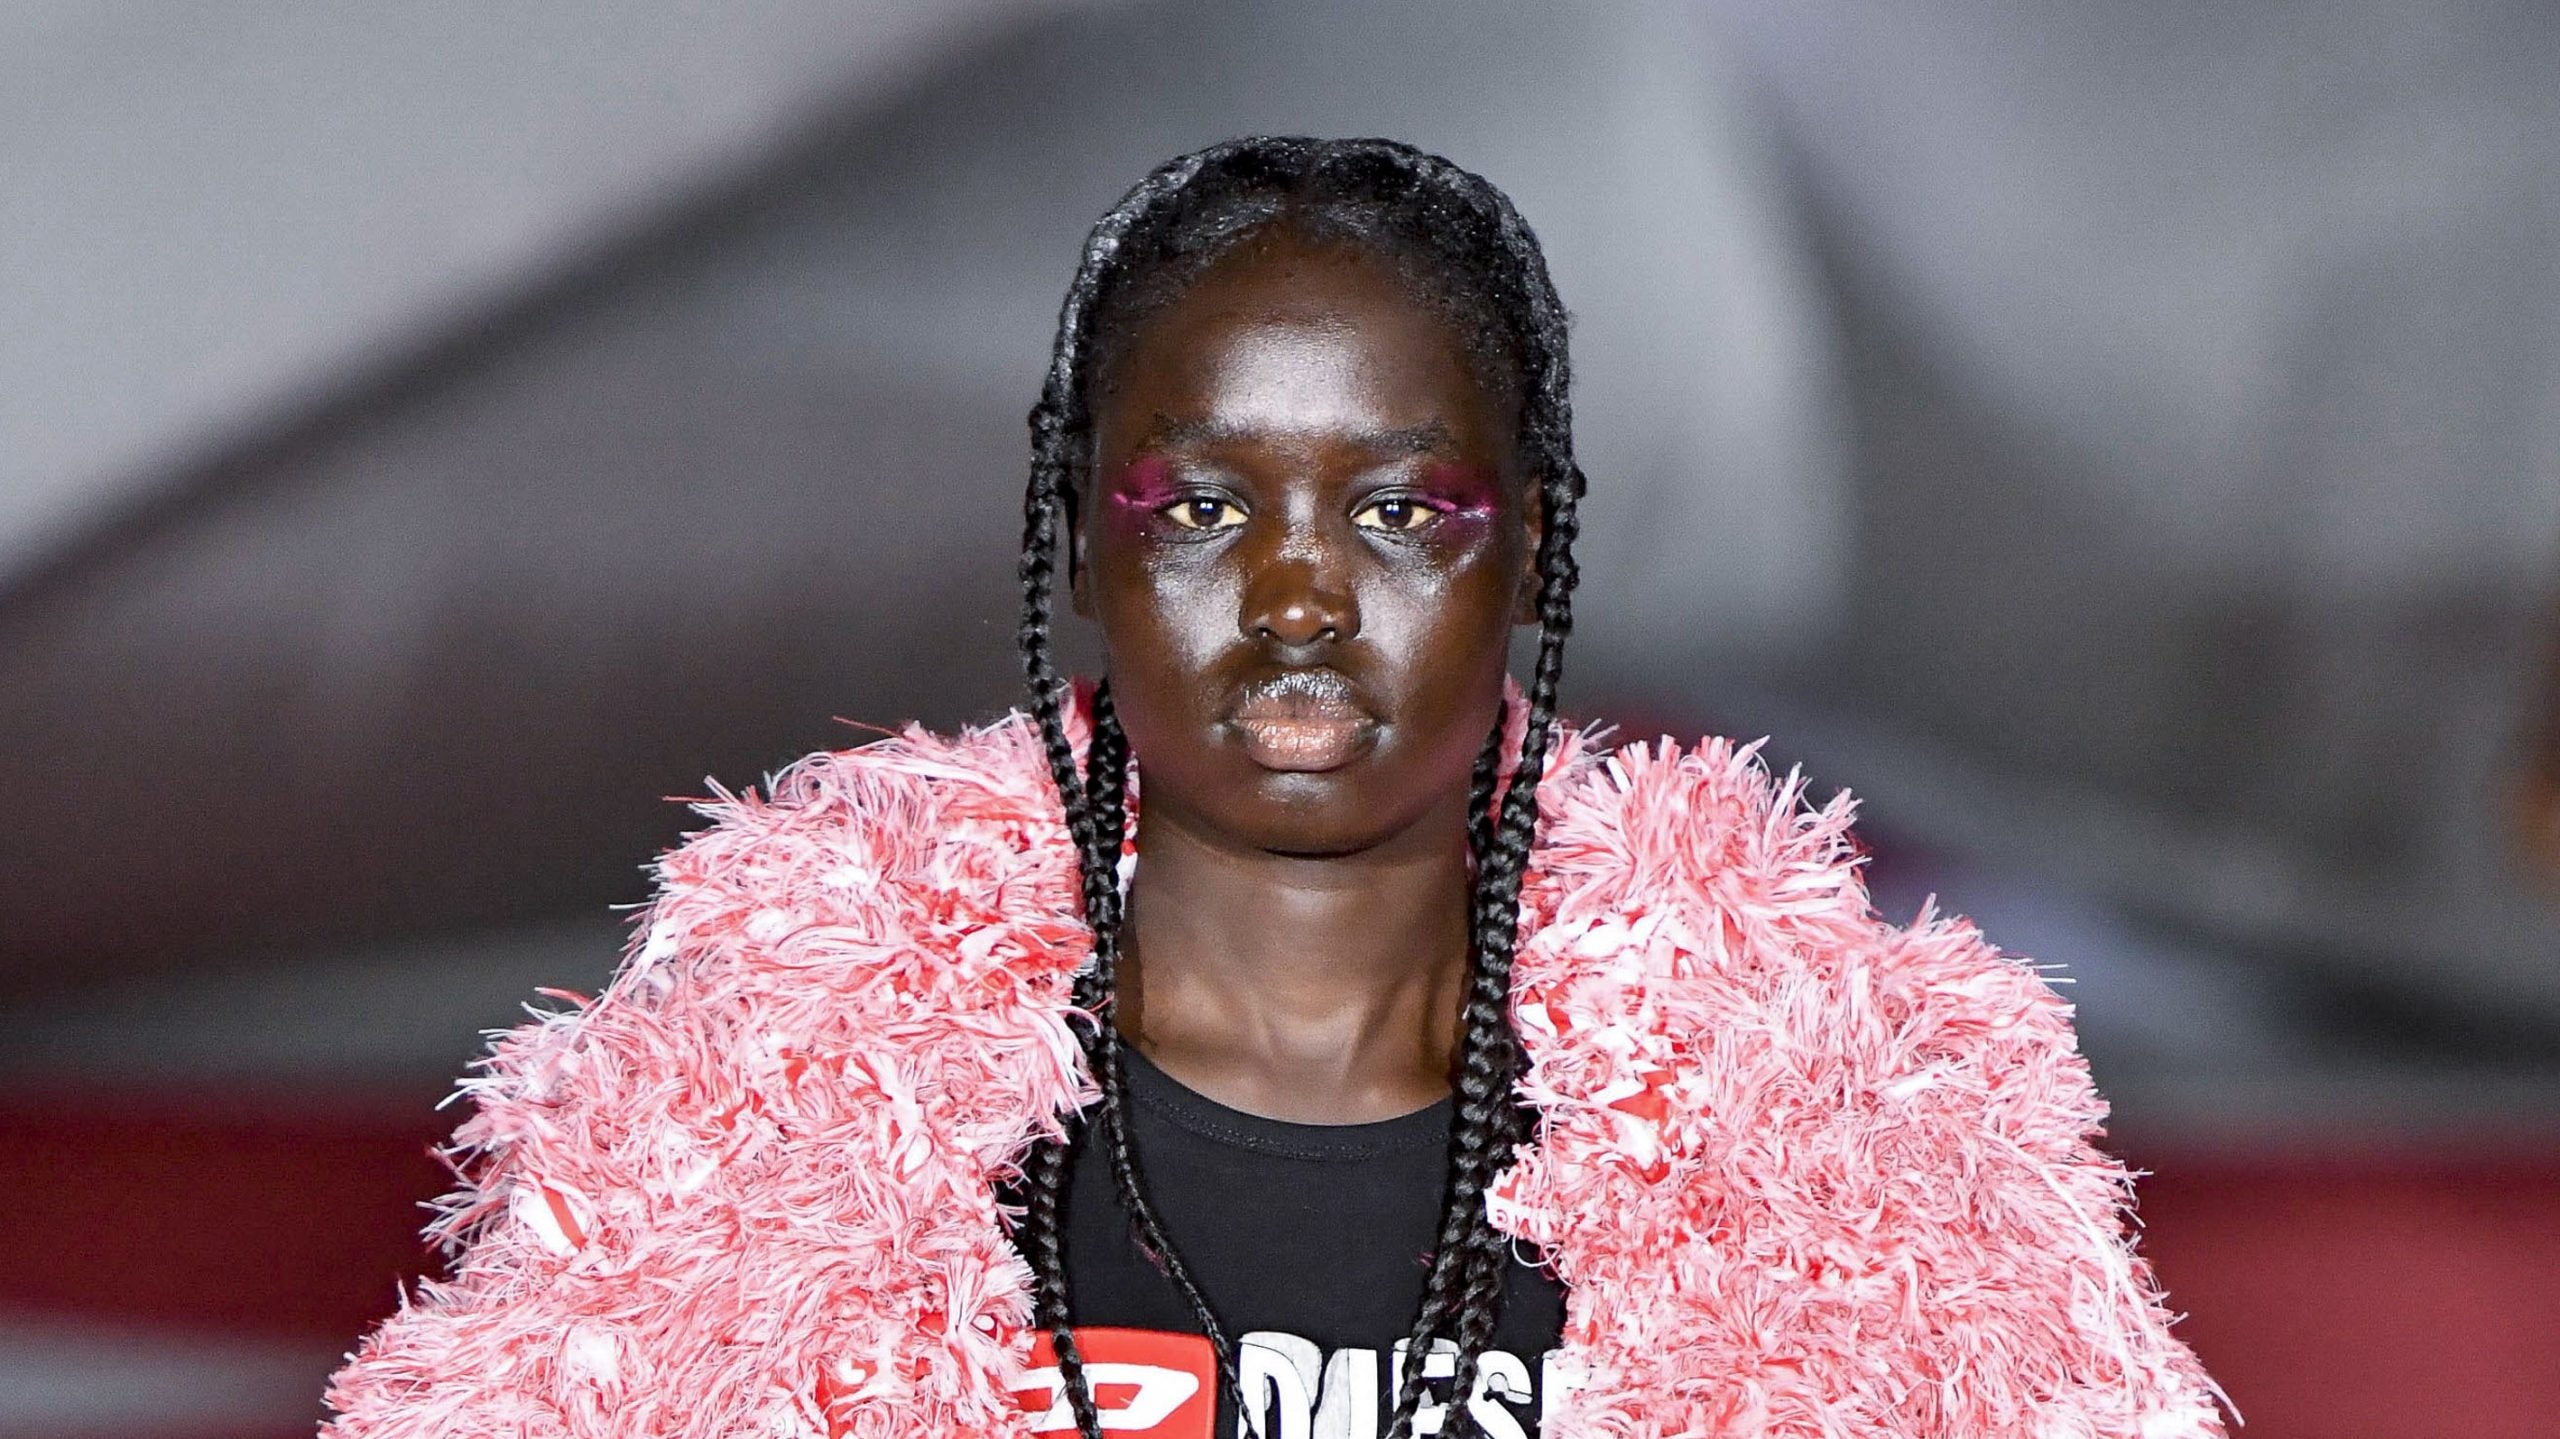 New Faces To Look Out For During Fashion Week